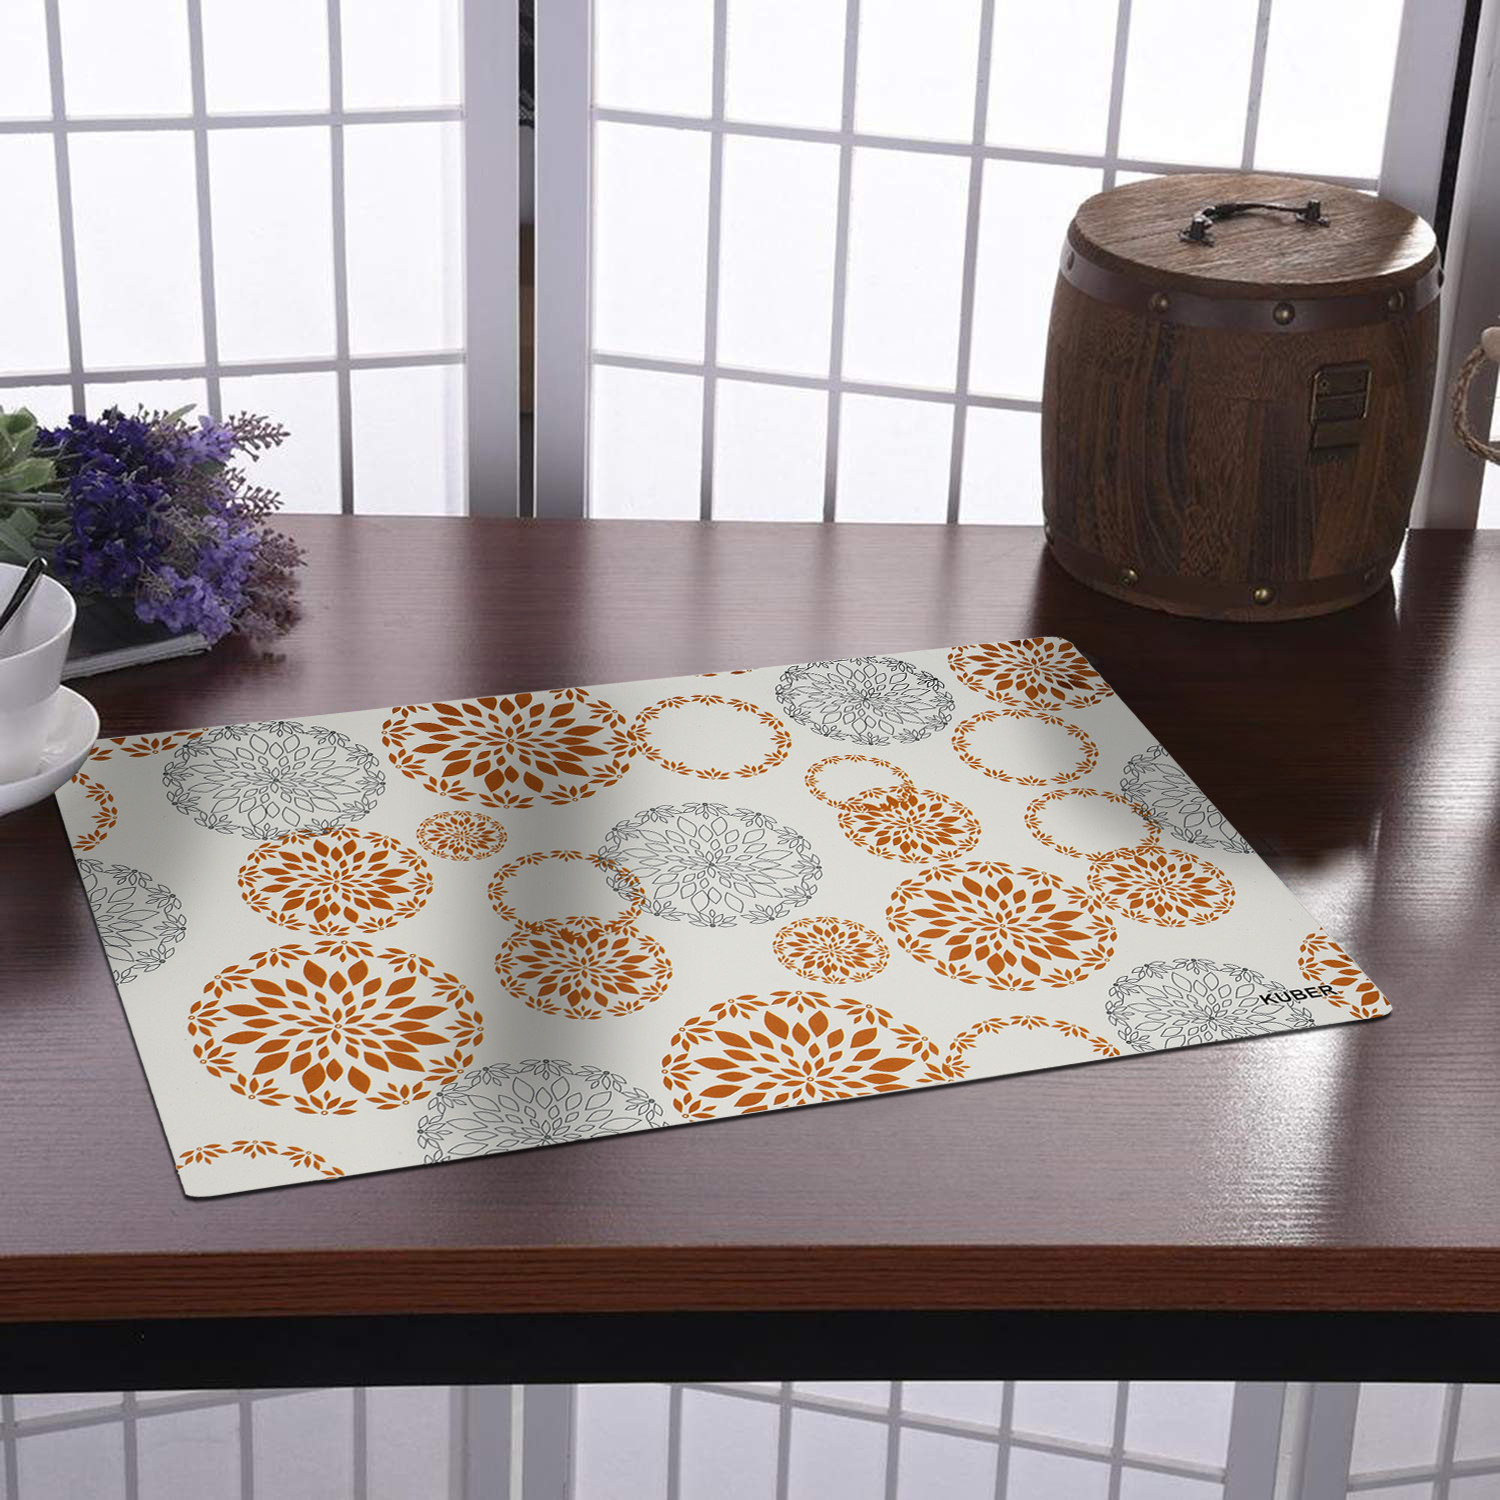 Kuber Industries Placemats Table Mats Non Slip Easy to Clean Wipeable Crossweave Woven PVC Washable Place Mats for Dining Kitchen Restaurant Table Set of 6, Rangoli,White